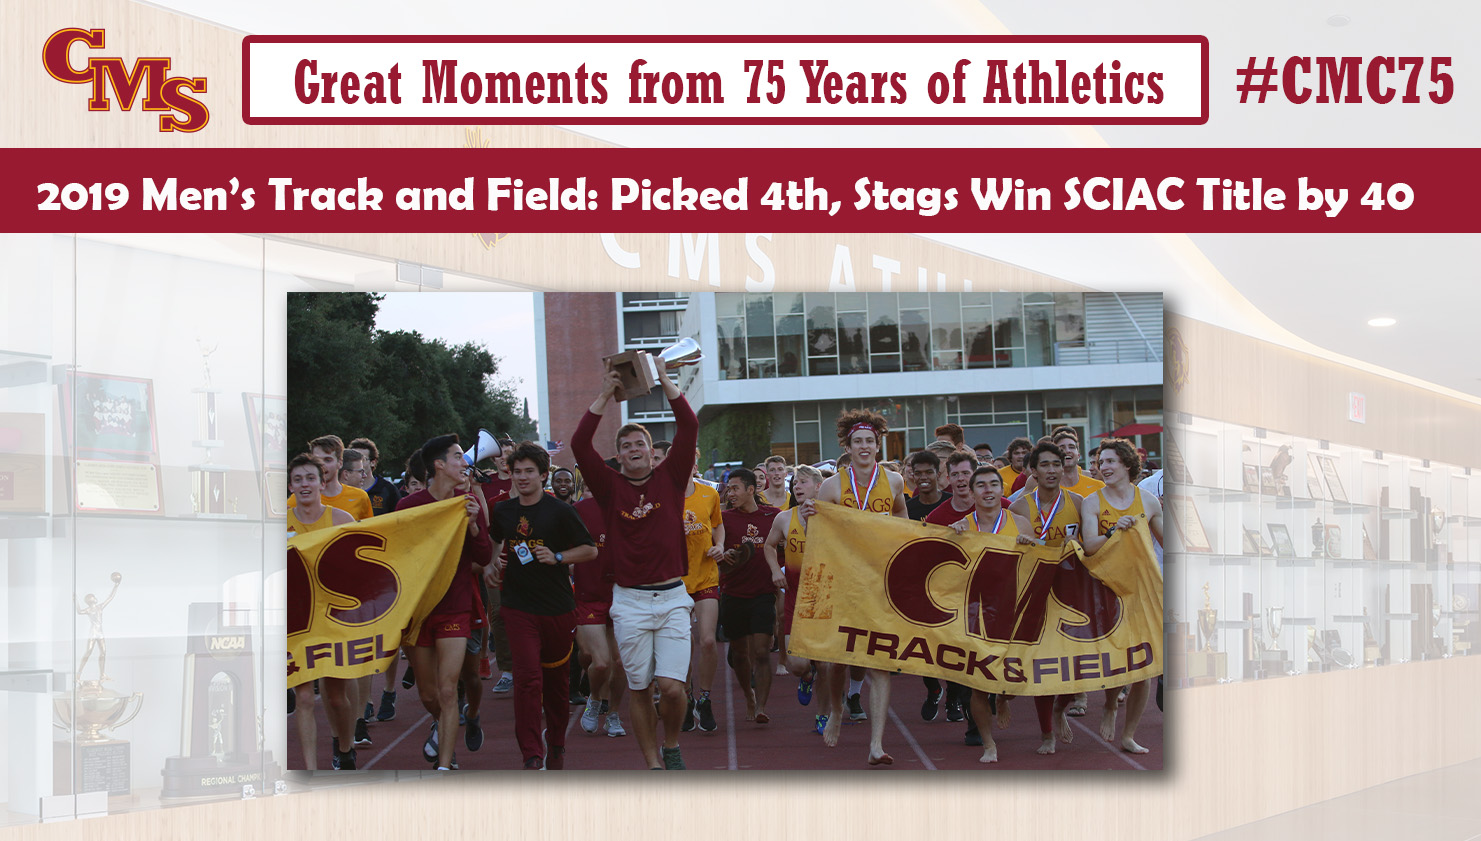 CMS men's track and field celebrating the 2019 SCIAC title. Words over the photo read: Great Moments from 75 Years of Athletics. 2019 Men's Track and Field: Picked 4th, Stags win SCIAC Title by 40